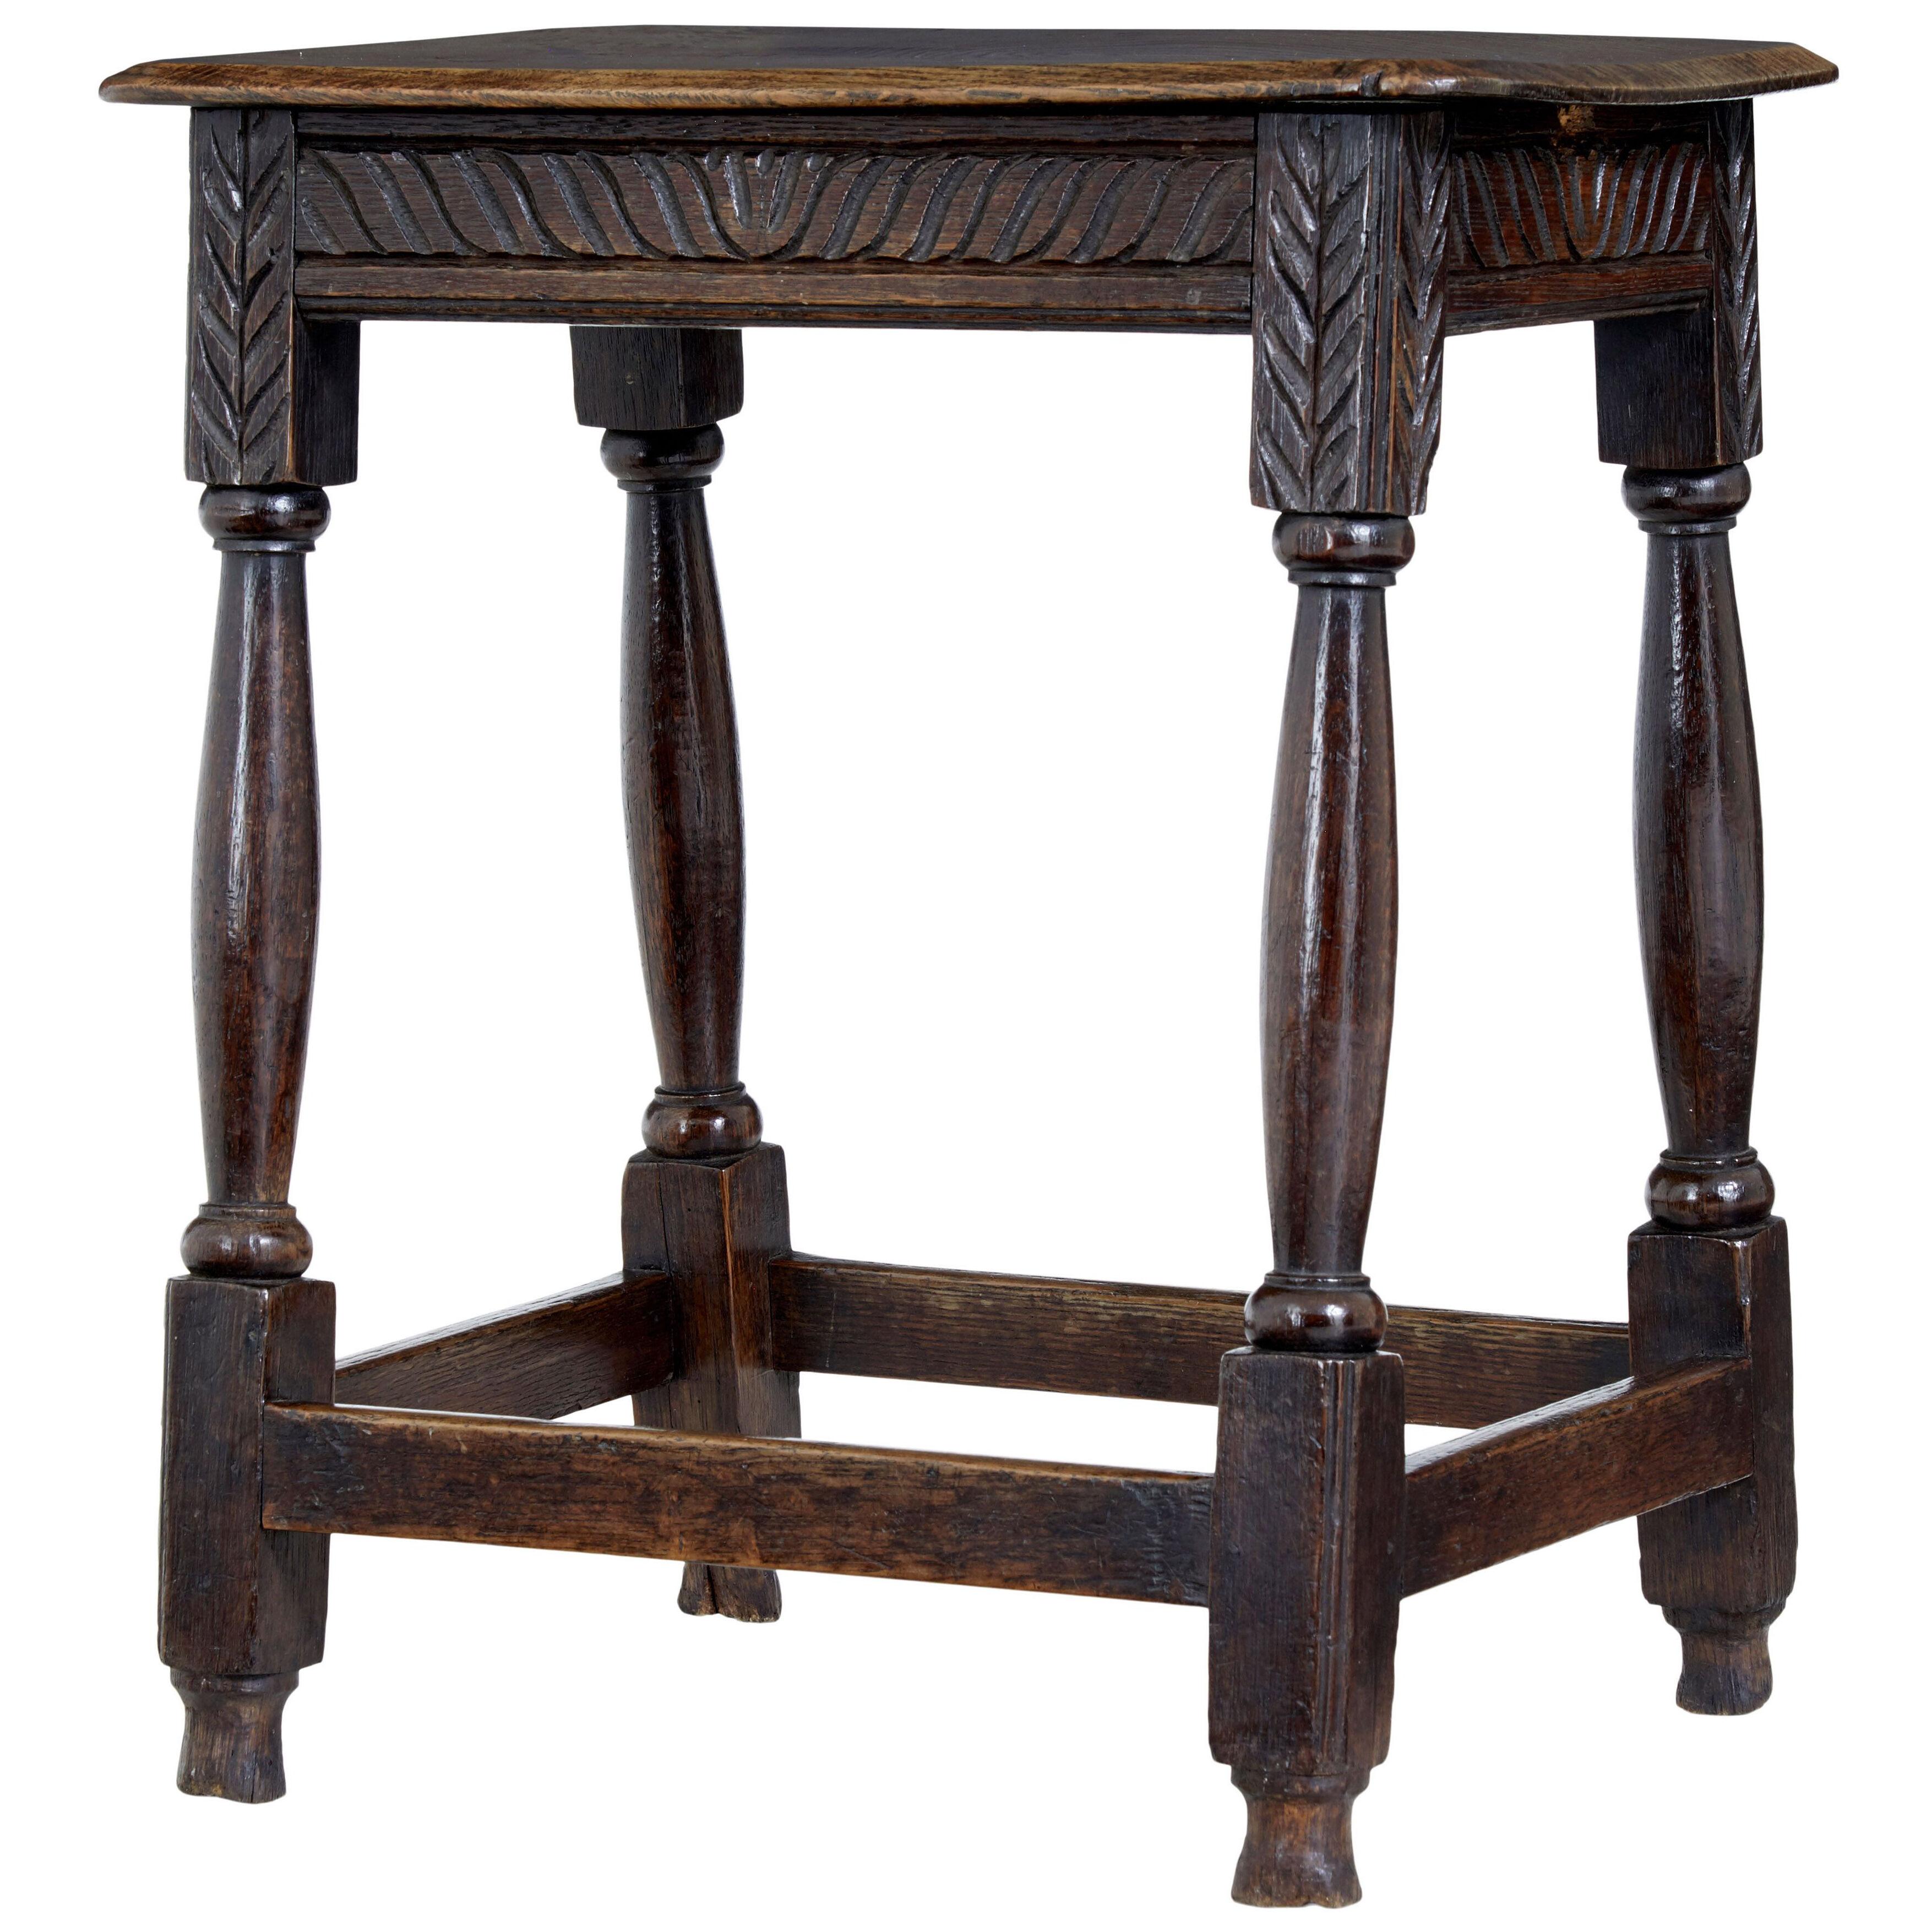 19TH CENTURY CARVED OAK JOINT STOOL